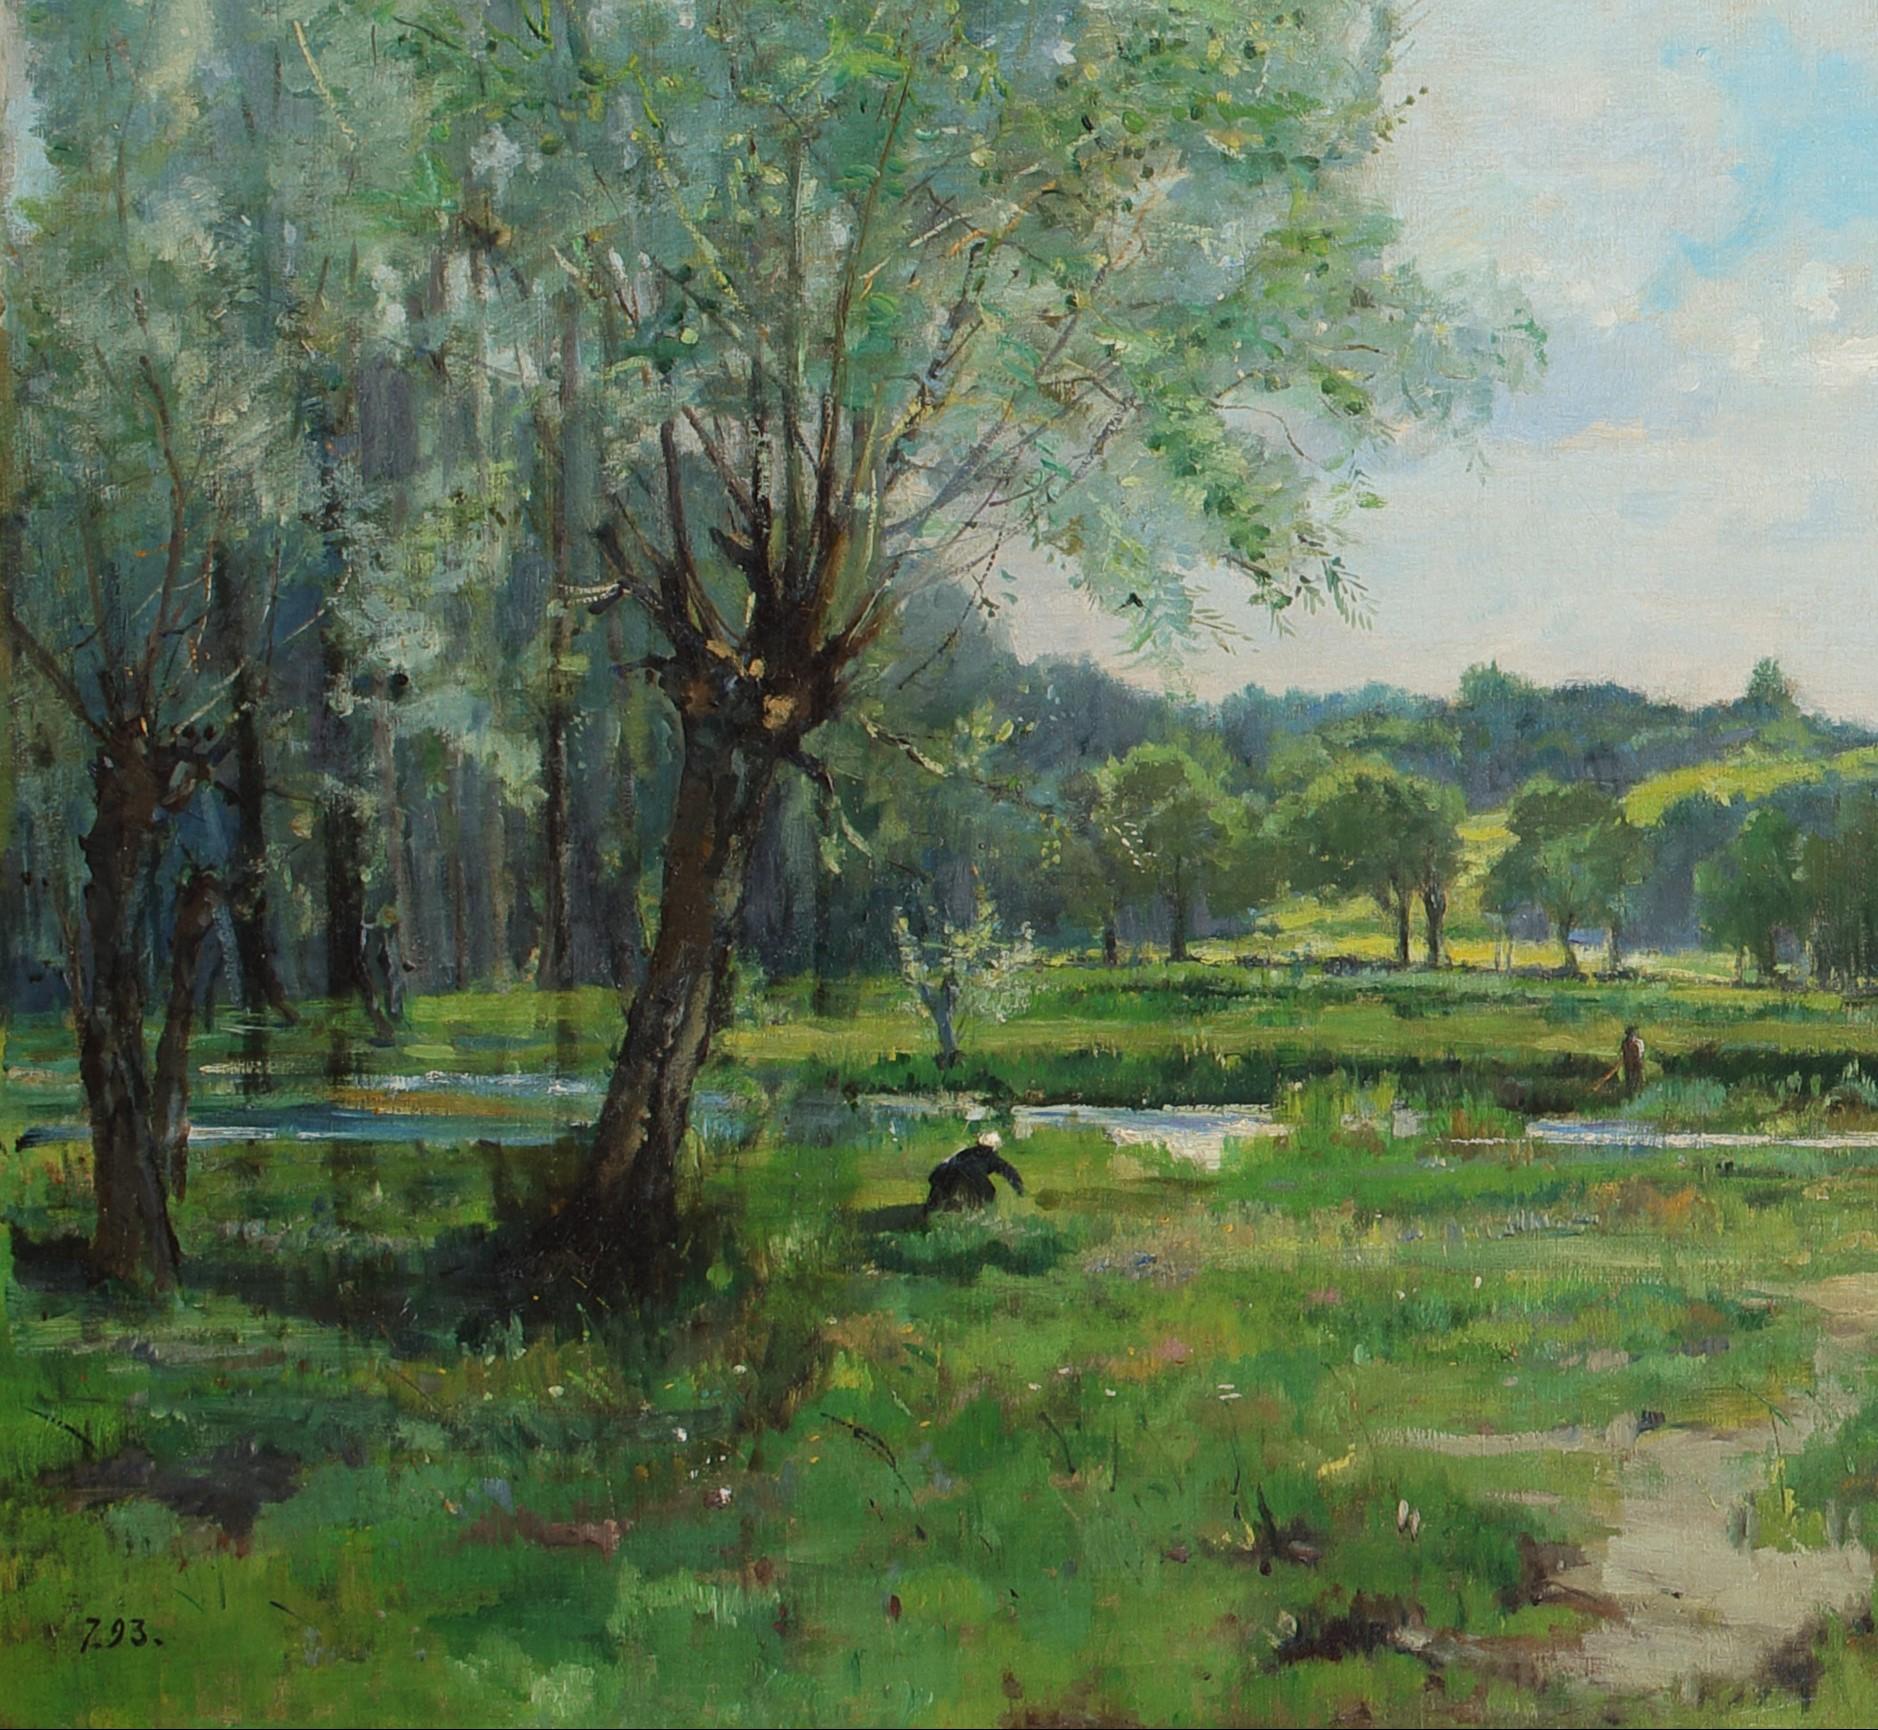 Landscape In July, dated 1892 - 